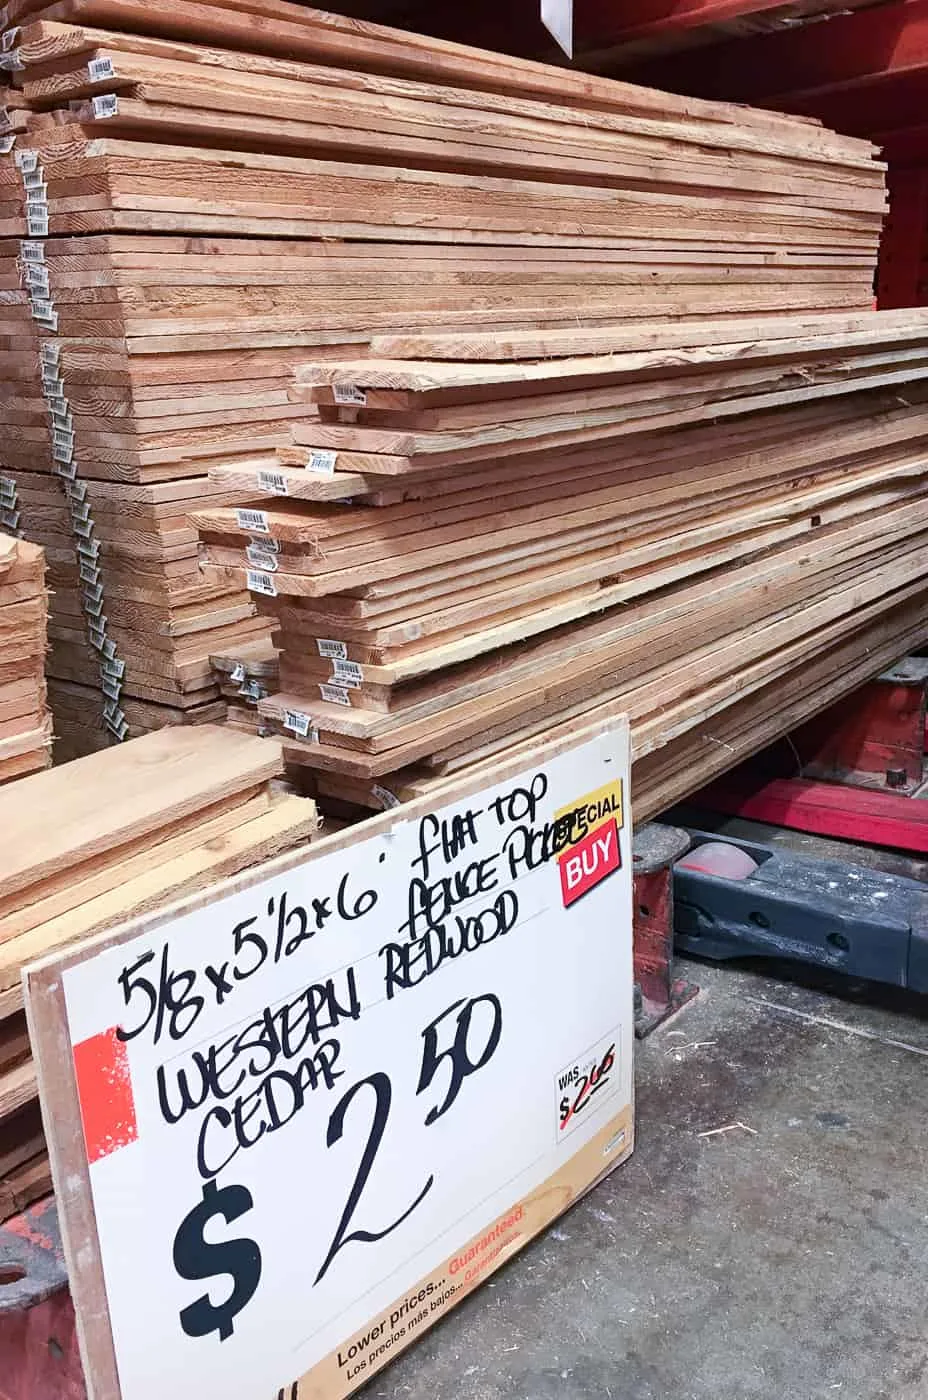 western red cedar fence pickets at Home Depot